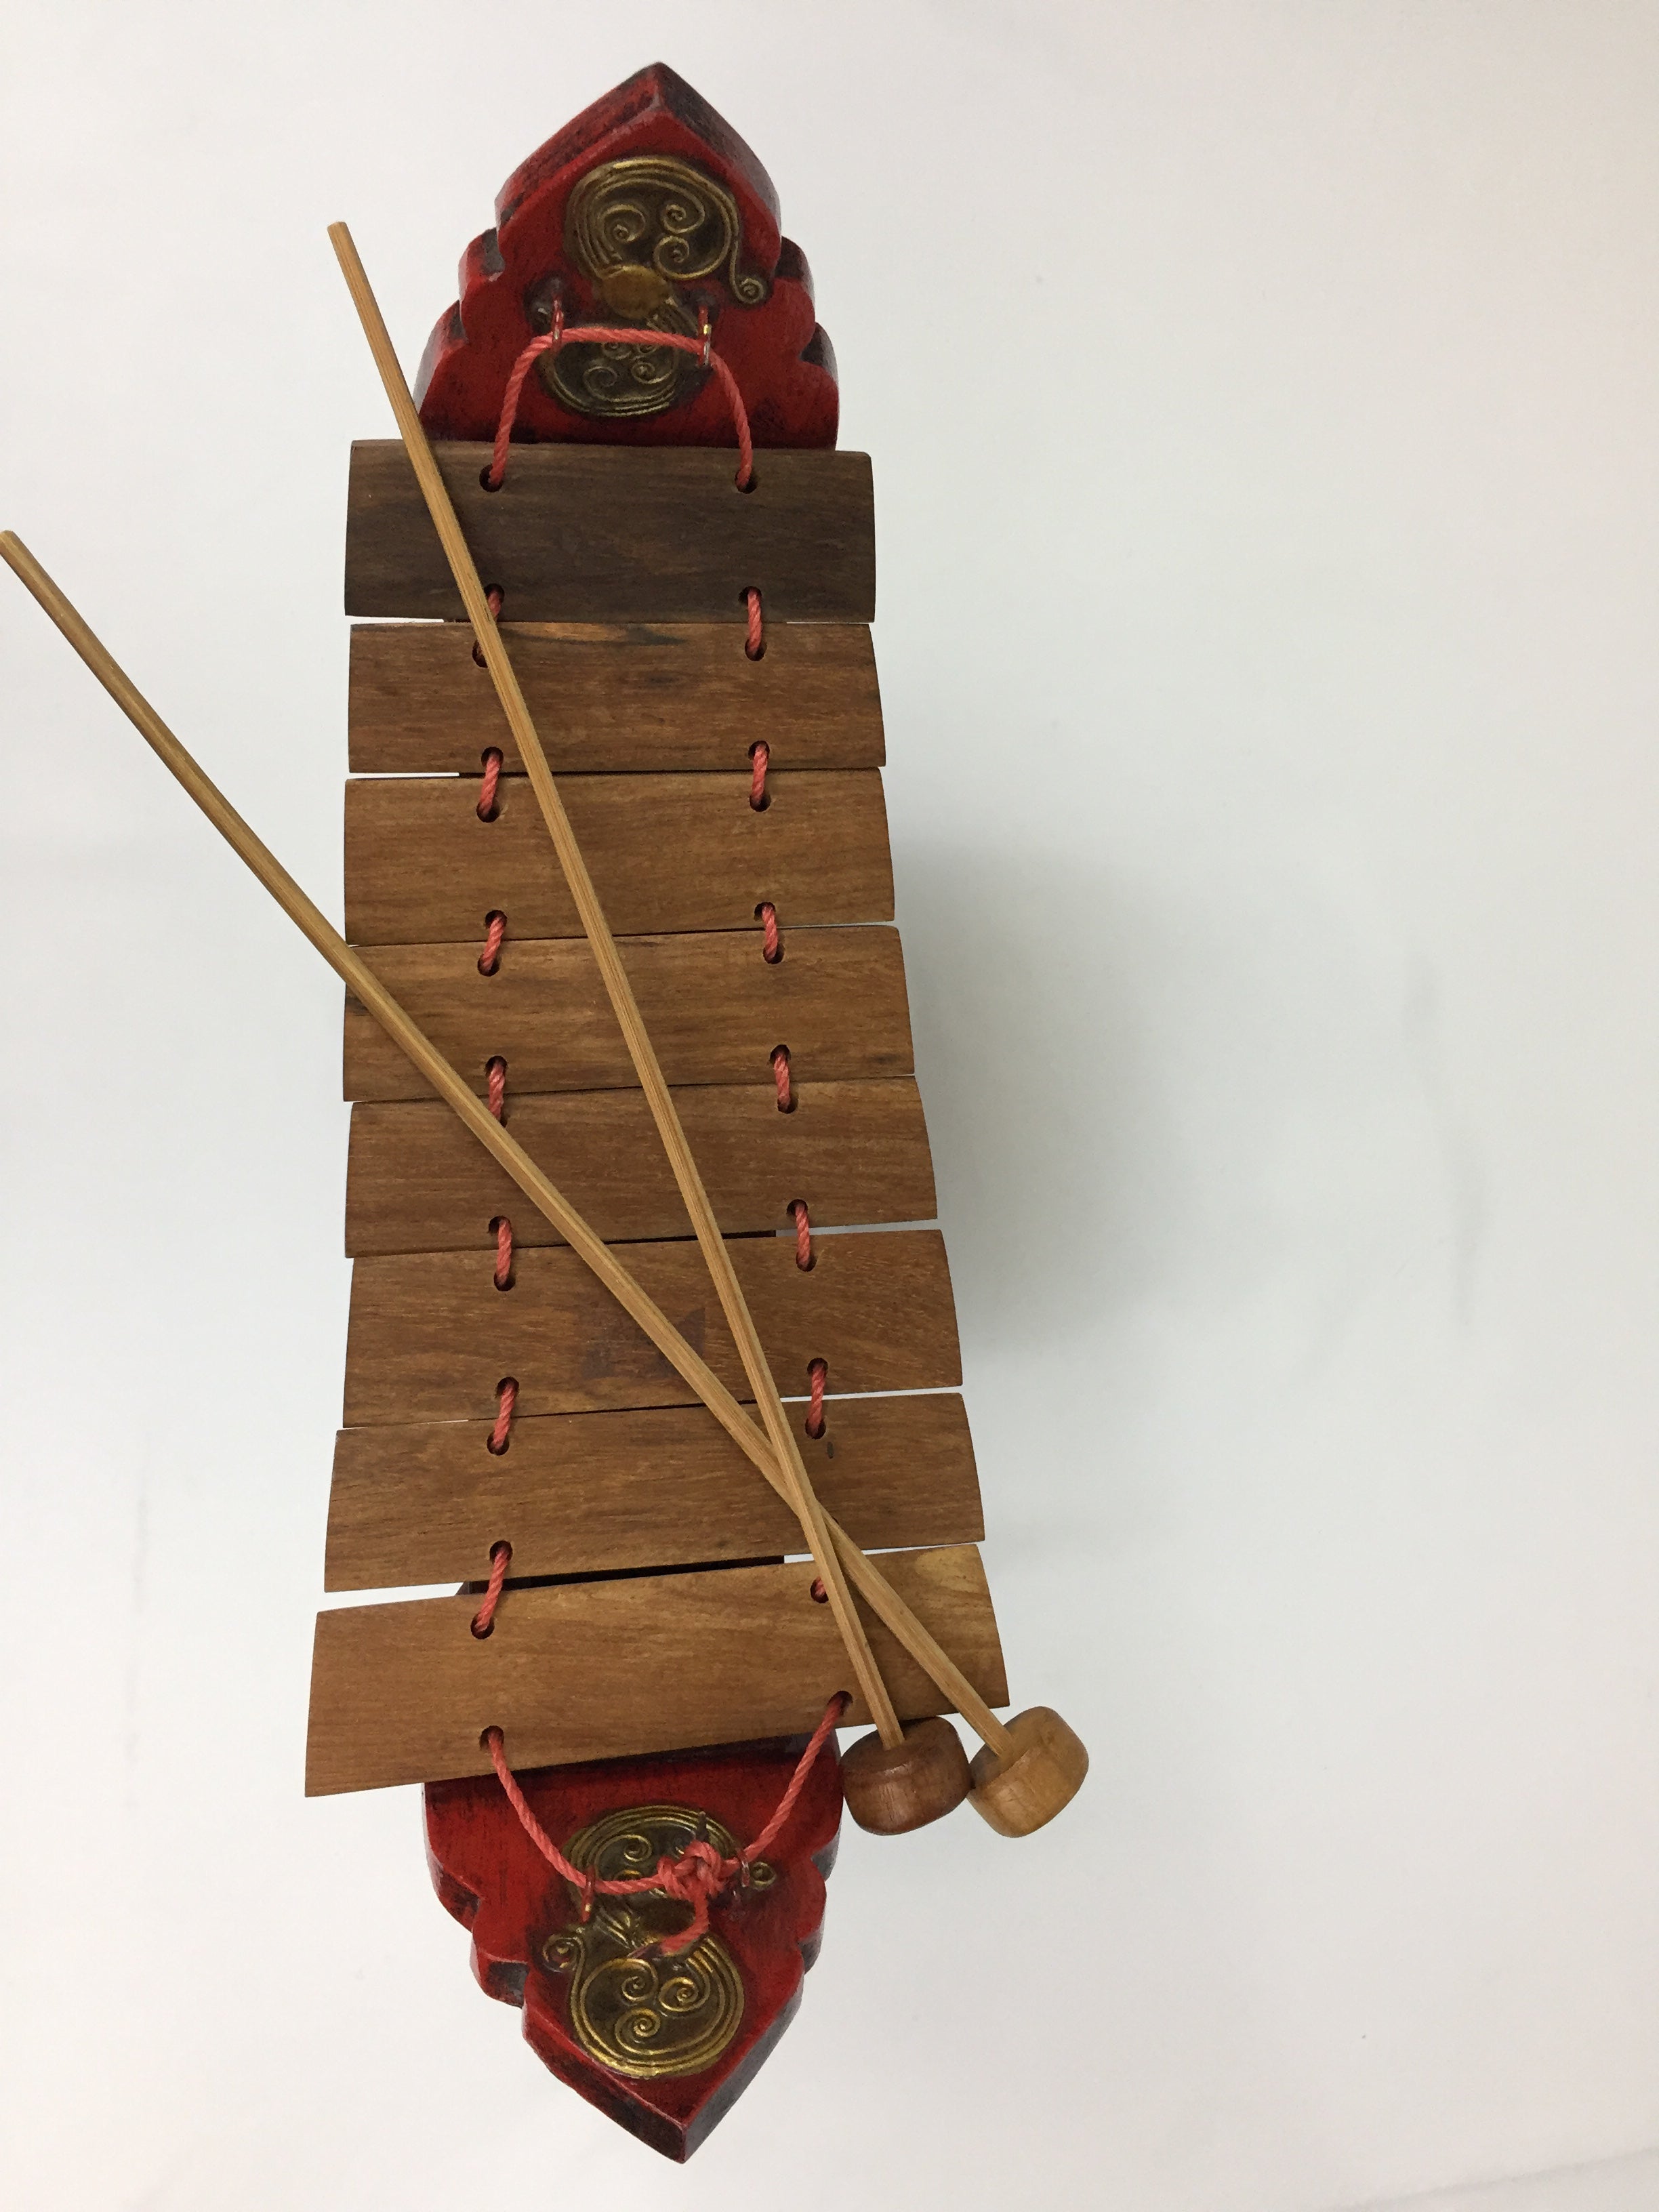 Thai Traditional Musical Instrument Wooden Xylophone.